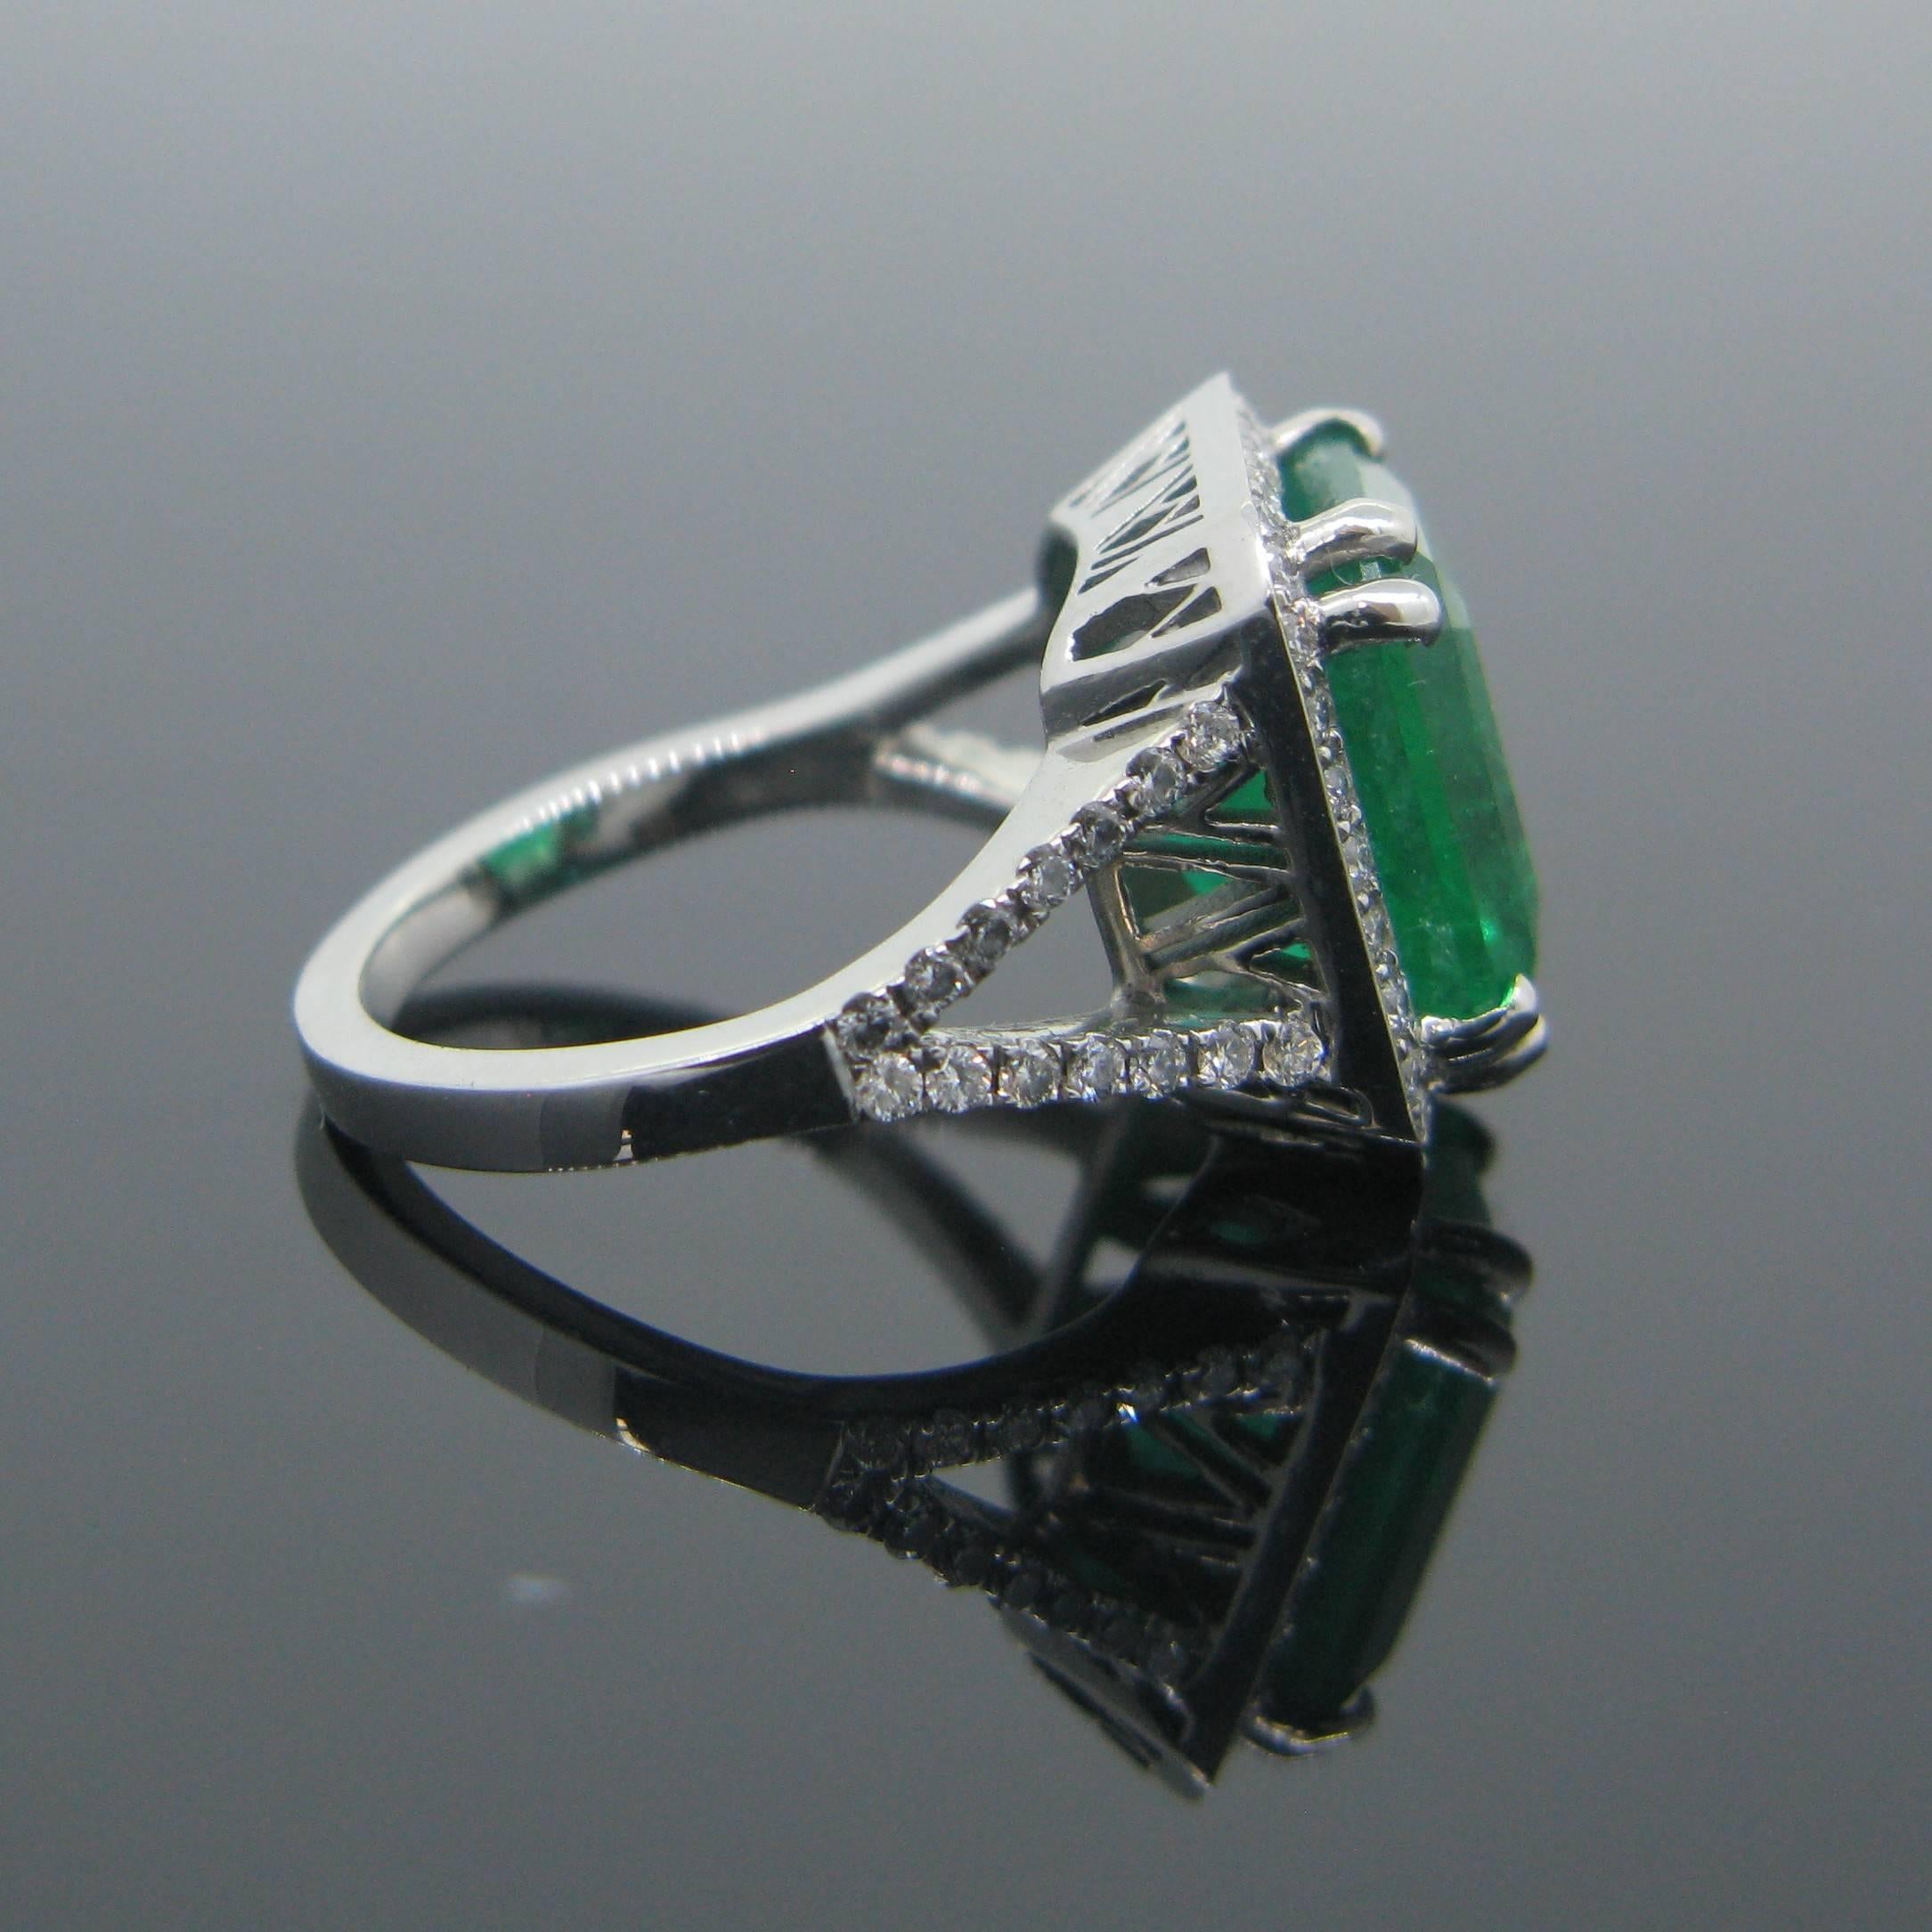 This stunning new ring is made in platinum and features a magnificent 6.14ct Colombian emerald with a vibrant green color. The stone is surrounded with 30 small diamonds and 28 diamonds on each side of the ring. Emerald is also known as the stone of